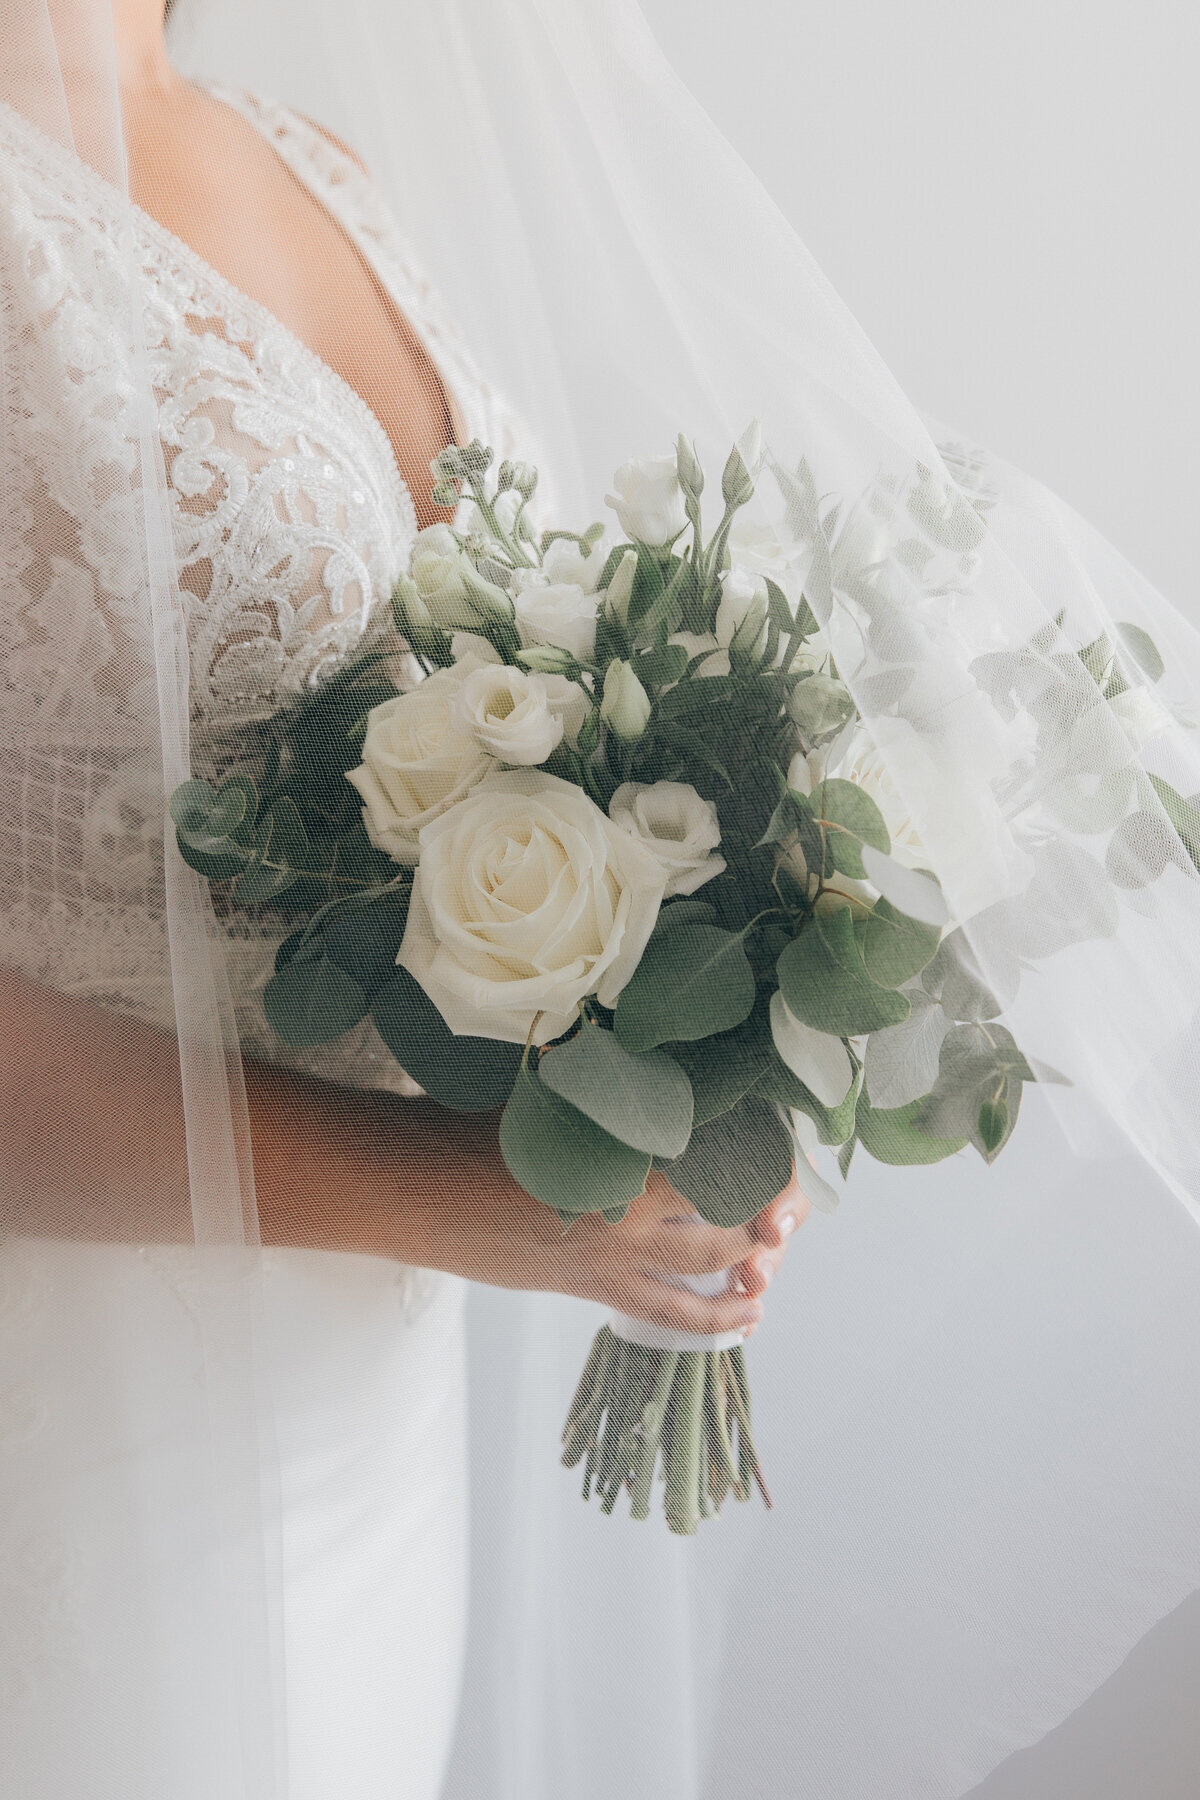 Elegant bridal bouquet with white flowers and lots of greenery